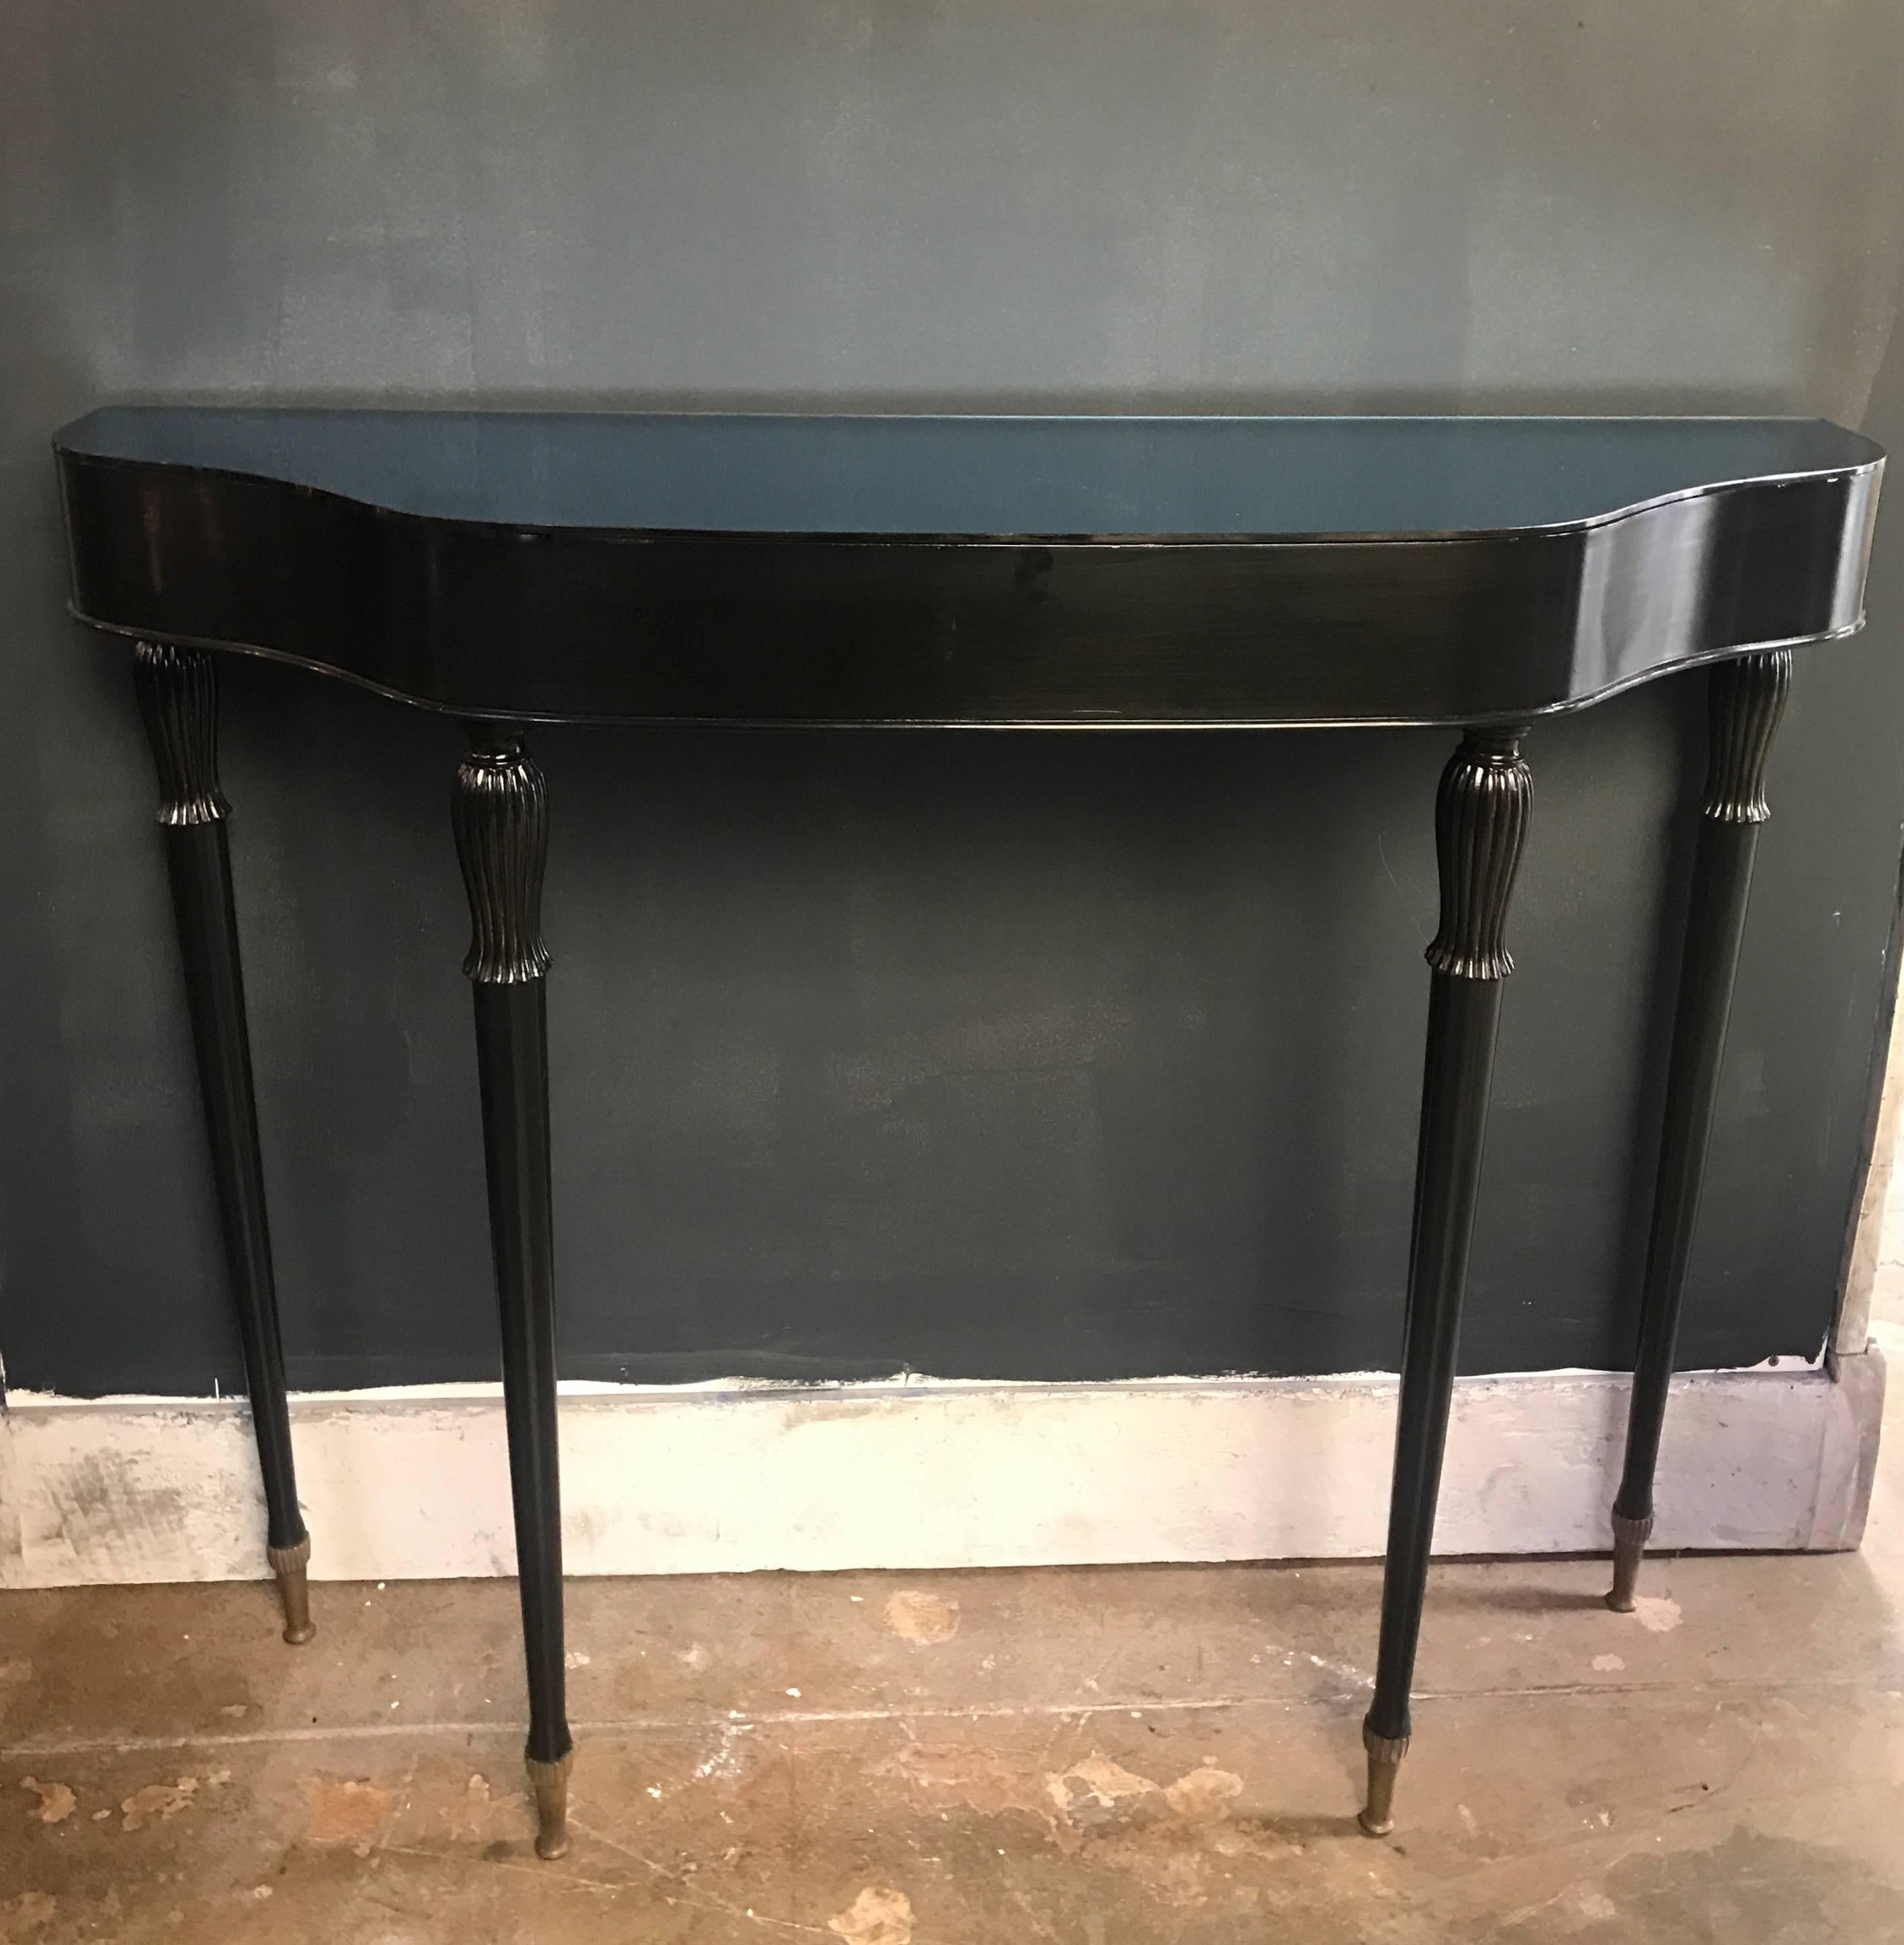 A midcentury Italian console table with black finish and deep blue mirrored glass top.
Elegant clean lines with tapered legs and unique brass footing.